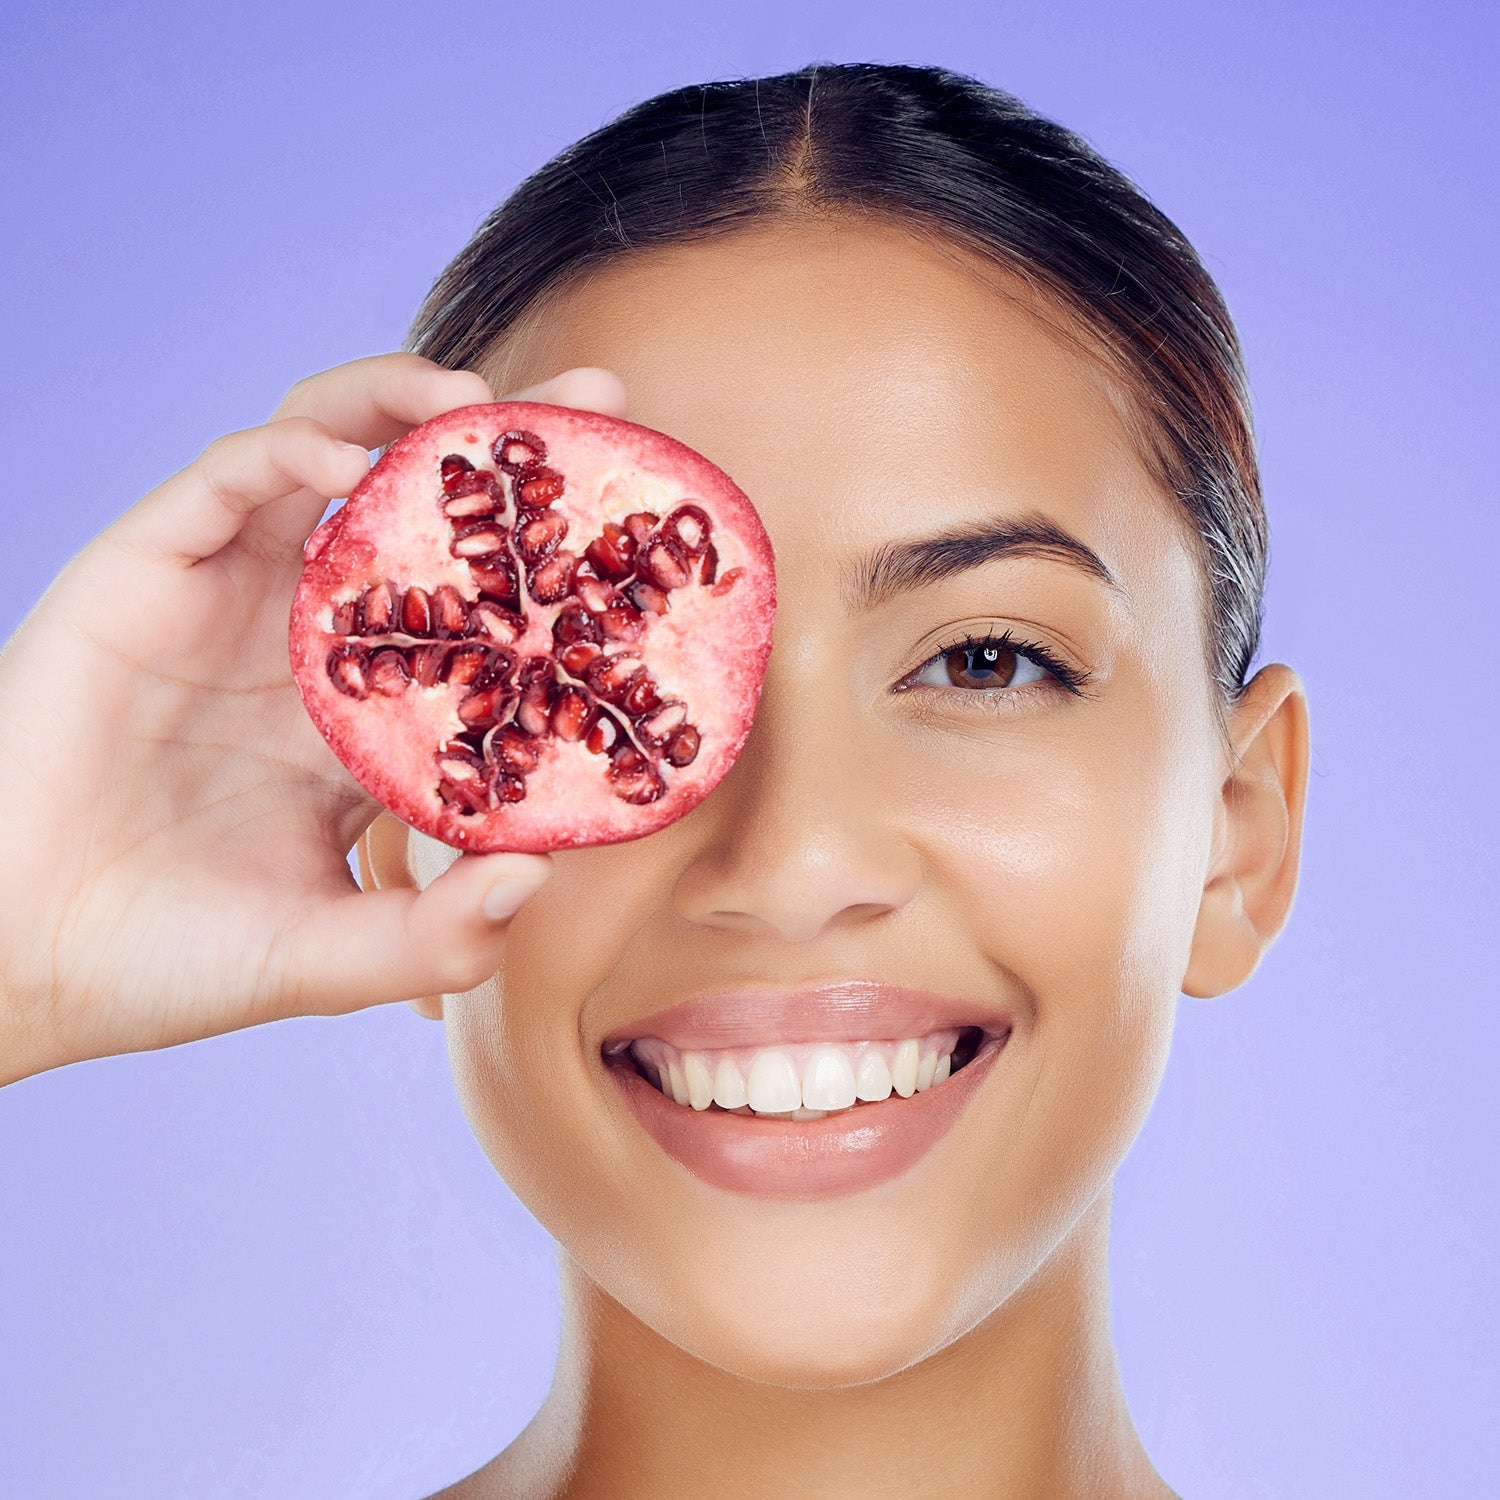 Use Skin Care Products with Pomegranate for Facial Cleansing and Glowing Skin